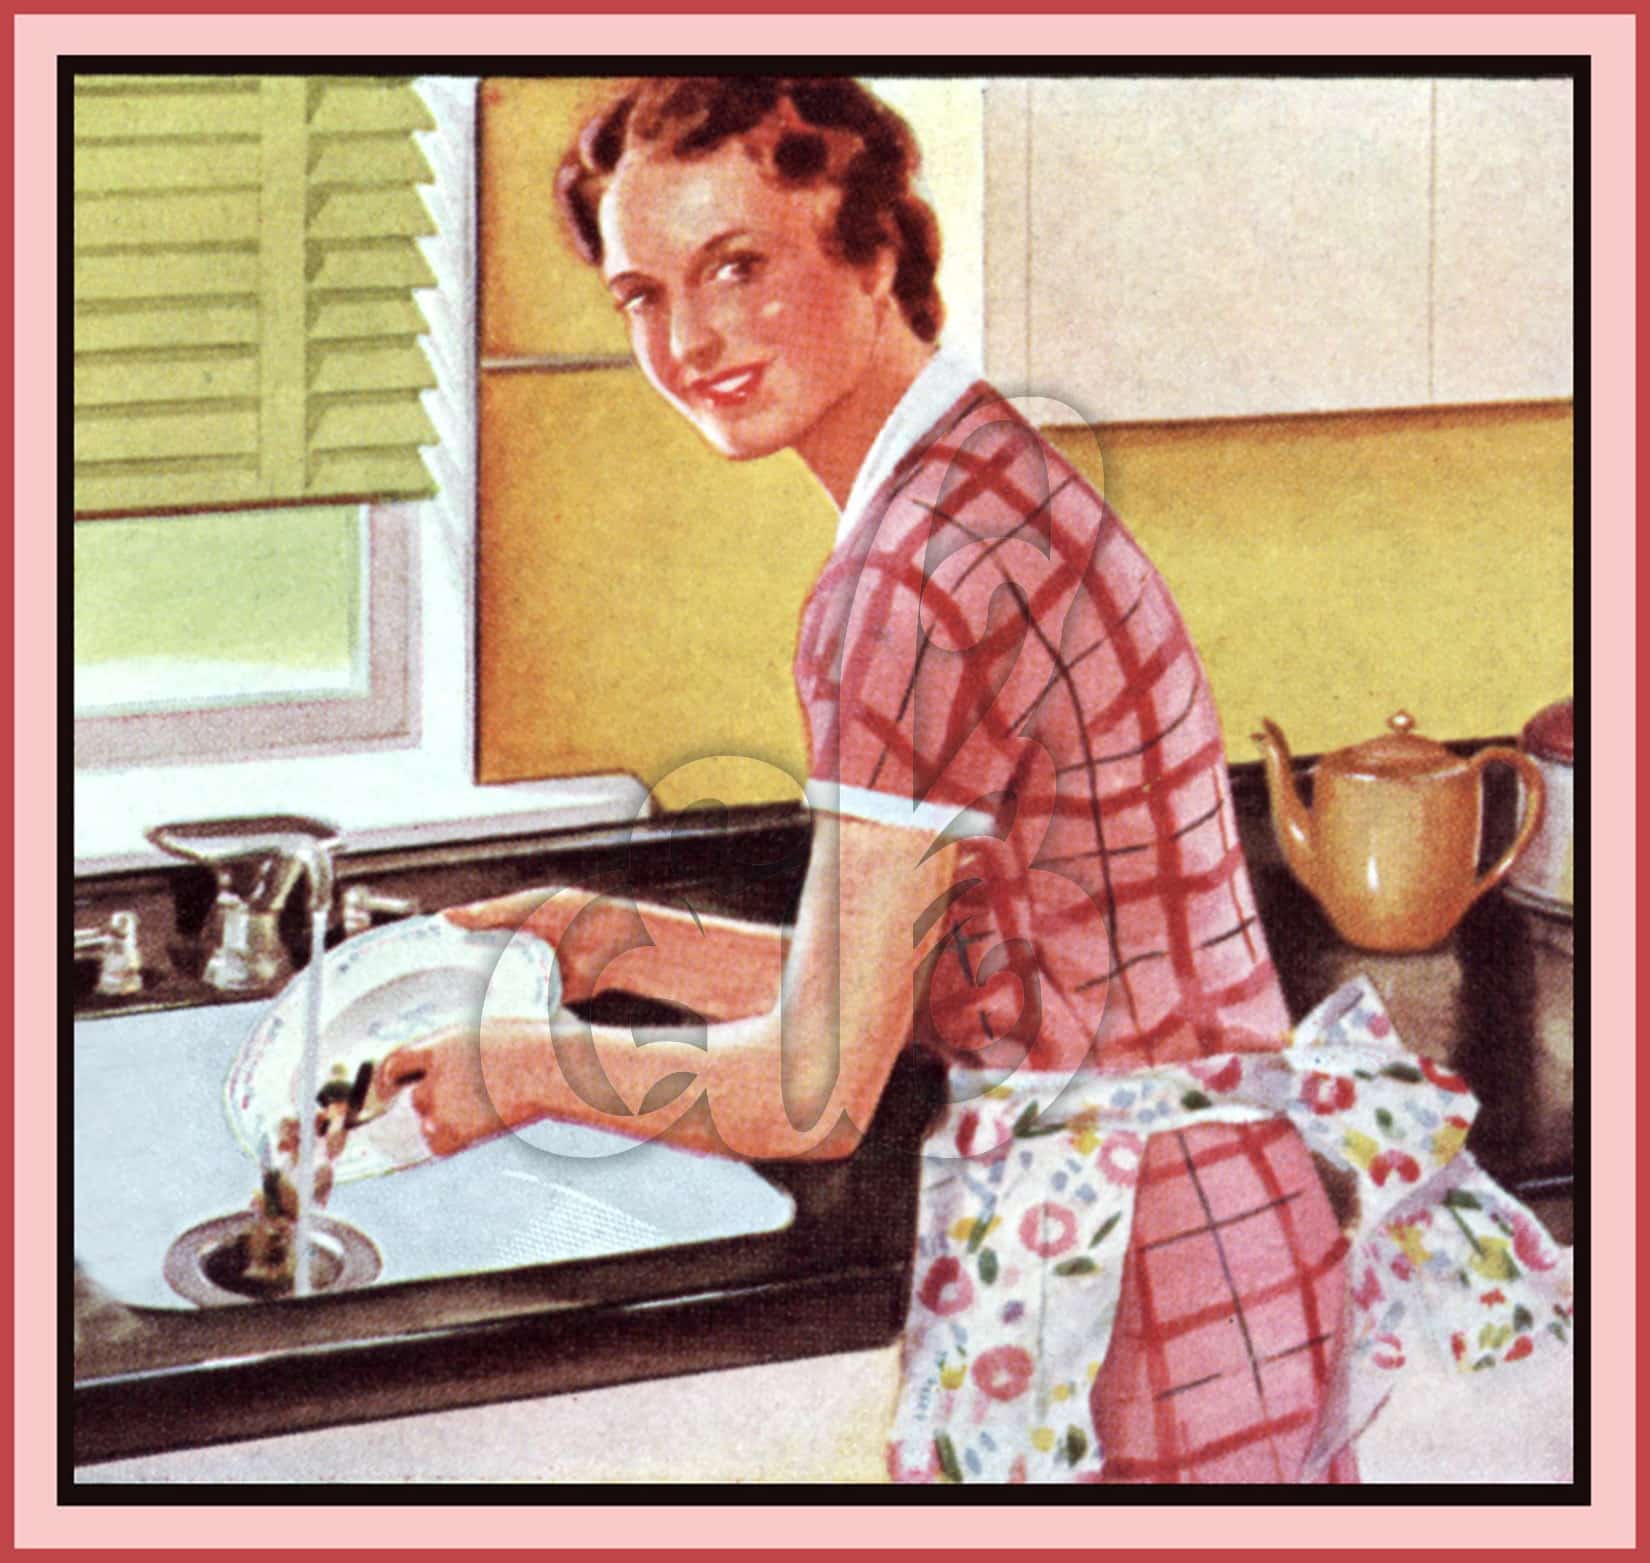 1950 S Housewife Washing Dishes Amy Barickman